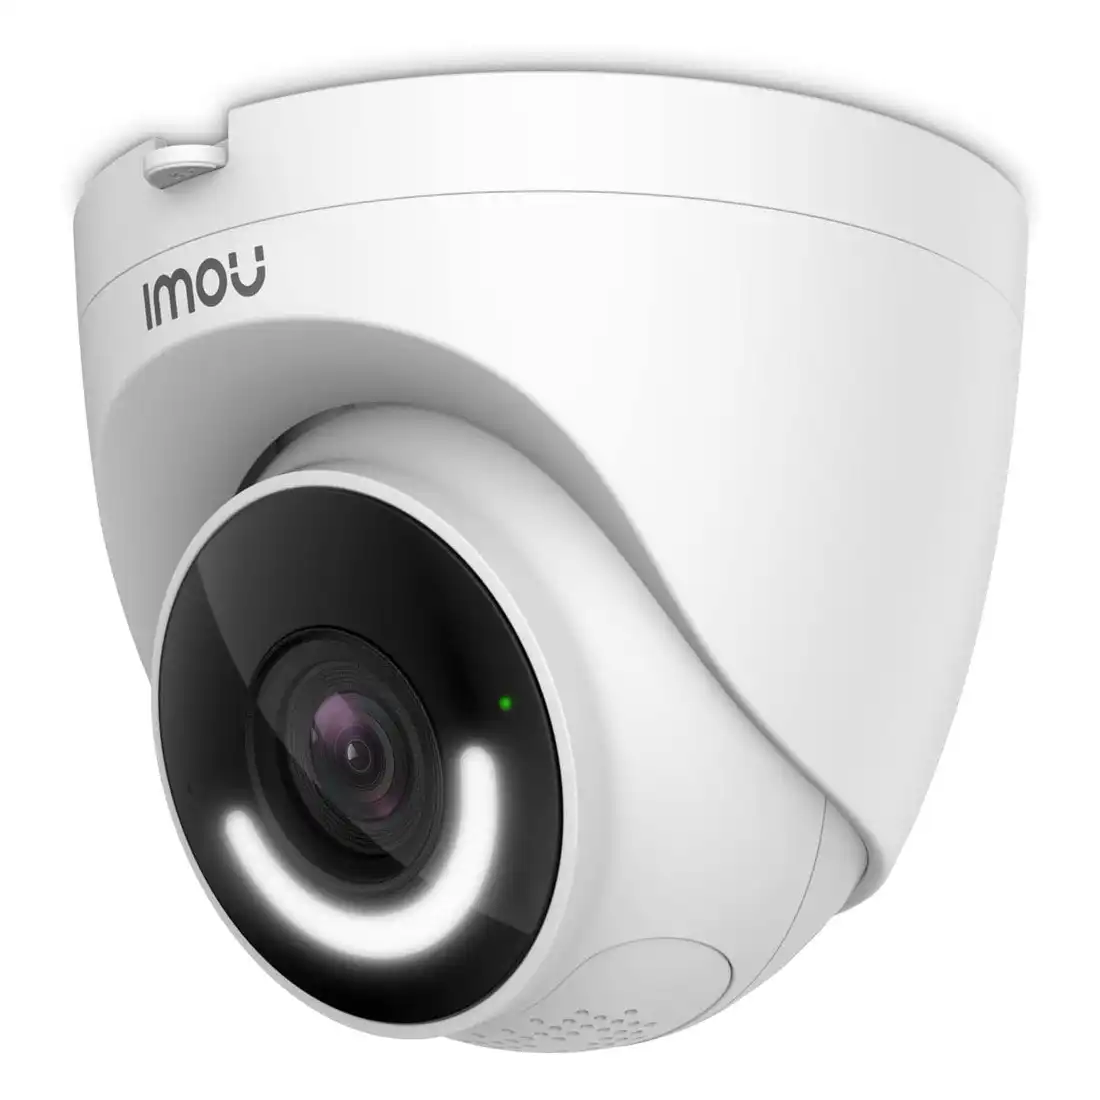 IMOU LOOC Active Deterrence Surveillance Camera with Siren and LED